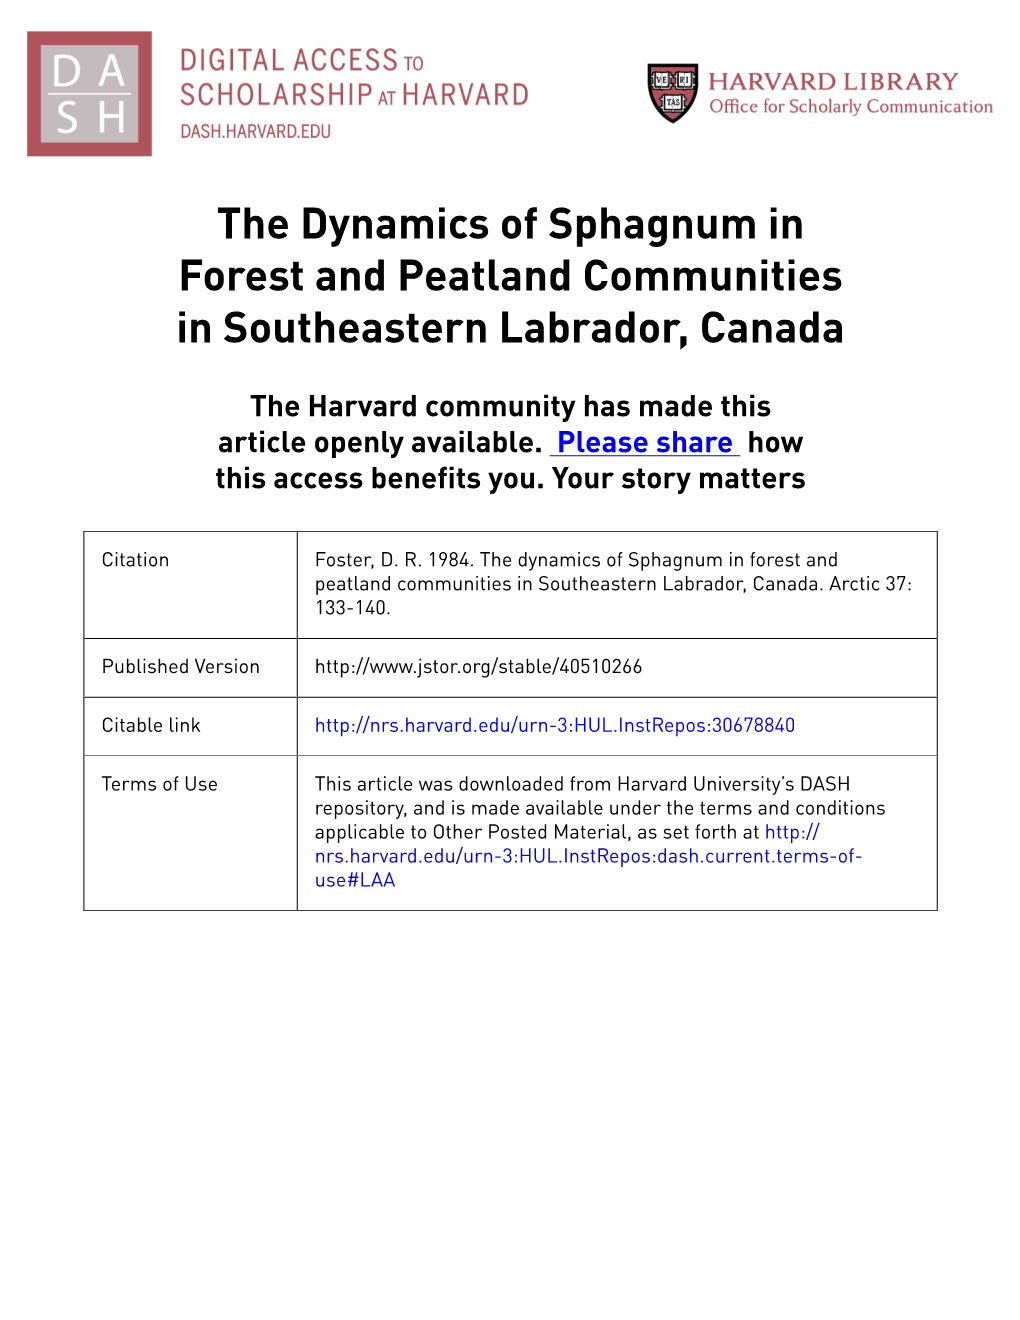 The Dynamics of Sphagnum in Forest and Peatland Communities in Southeastern Labrador, Canada